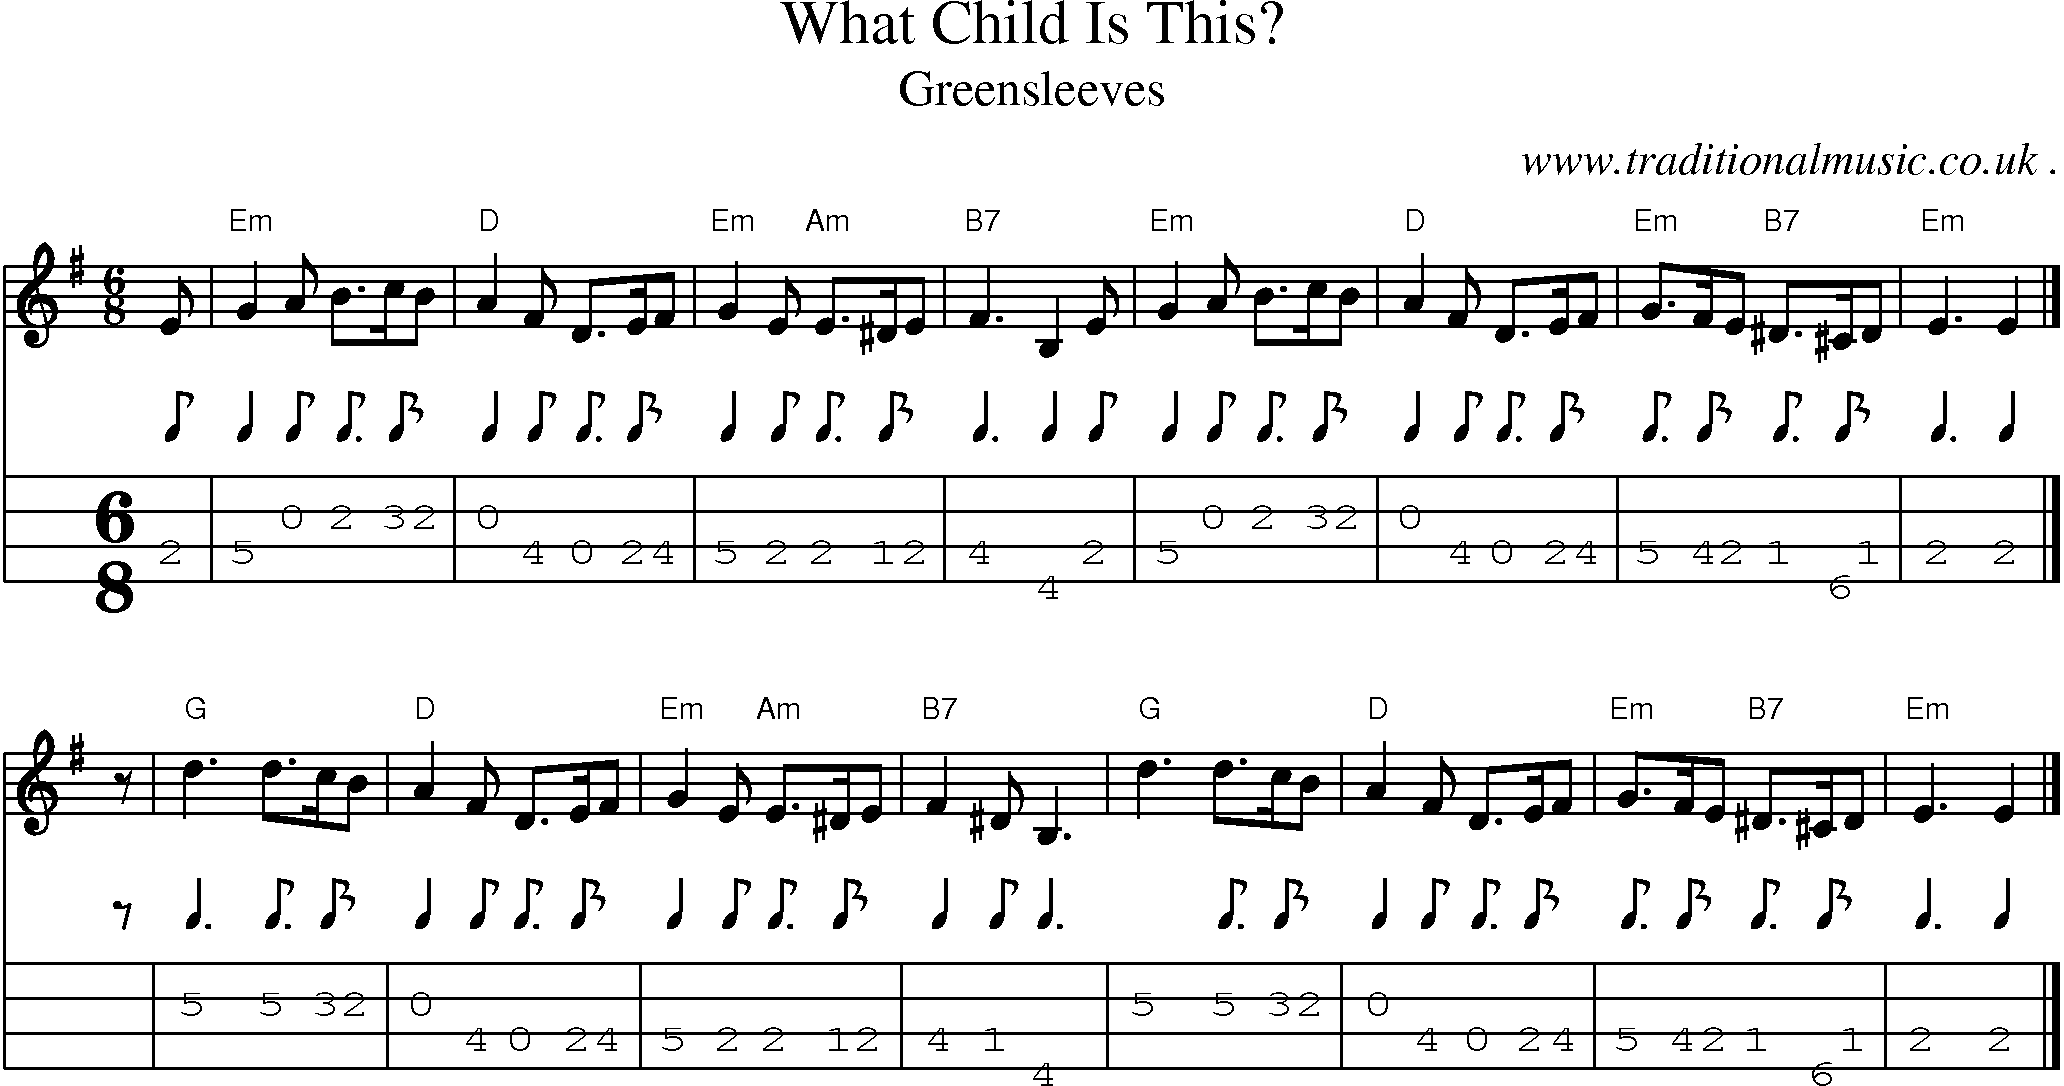 Sheet-music  score, Chords and Mandolin Tabs for What Child Is This